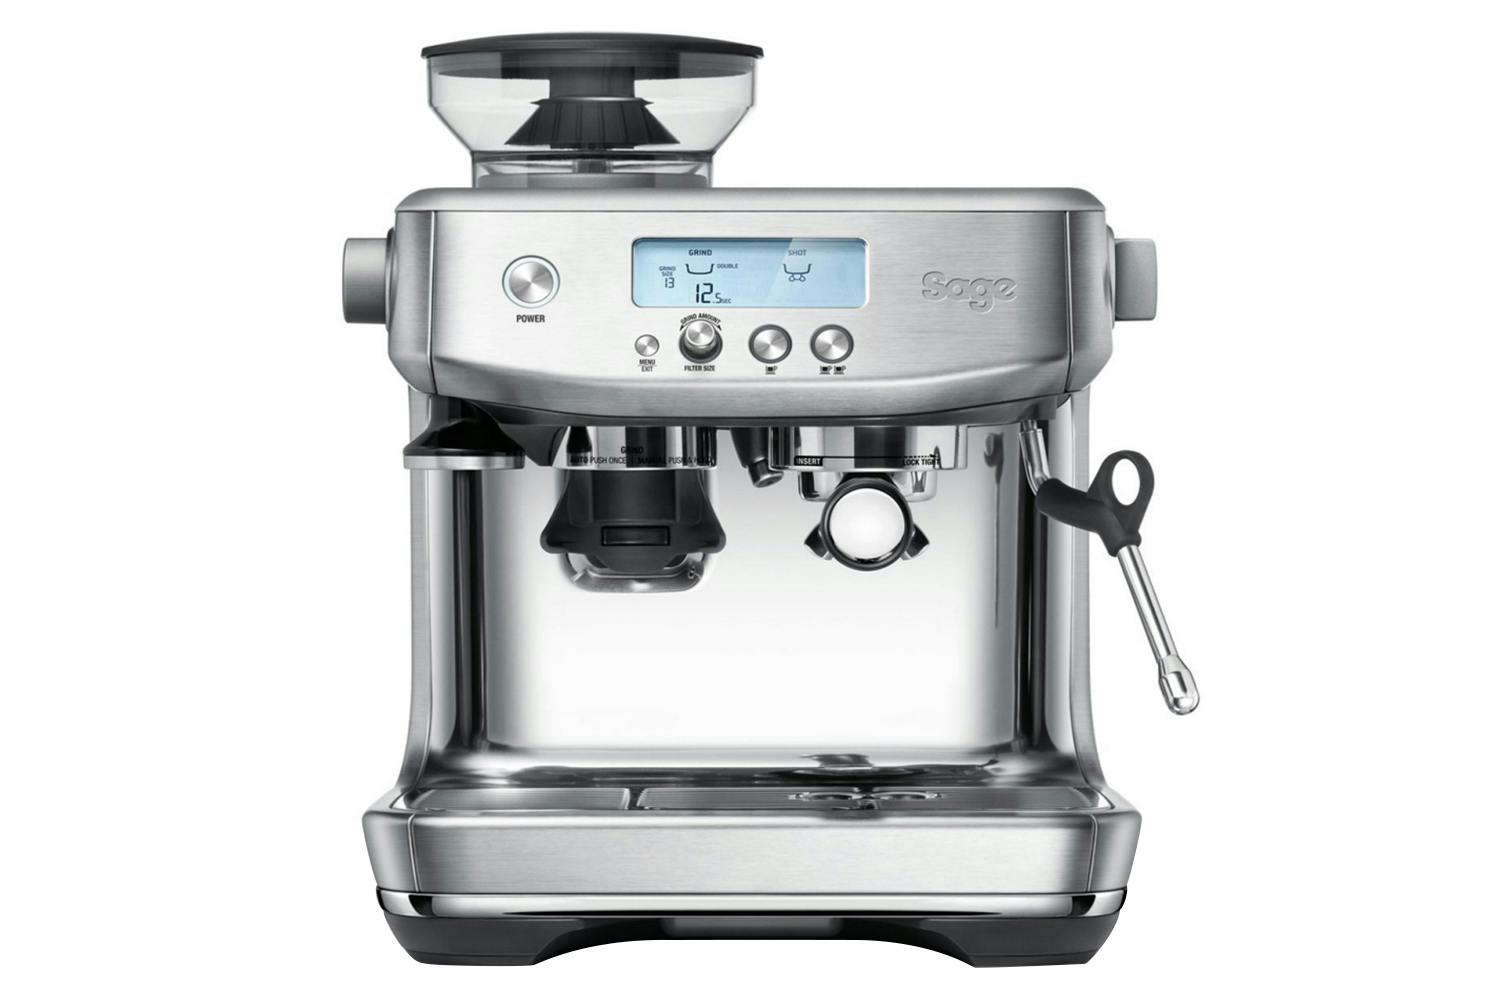 The Breville Barista Express Is $150 Off Right Now